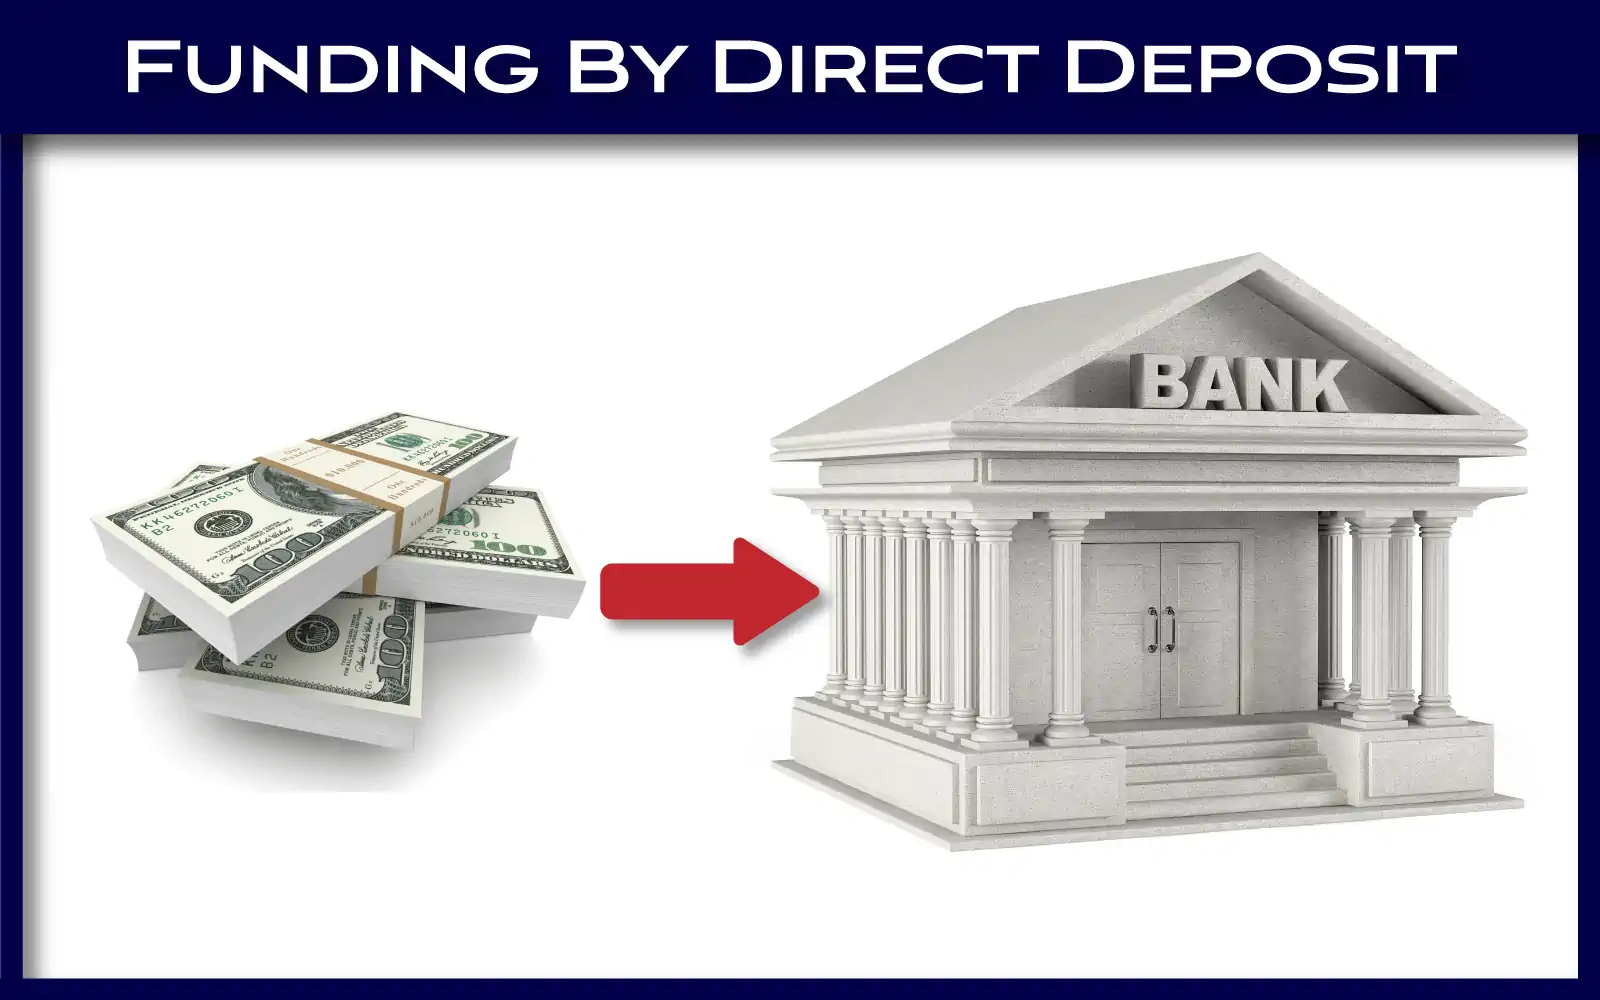 Instant online title loan funded by direct deposit.